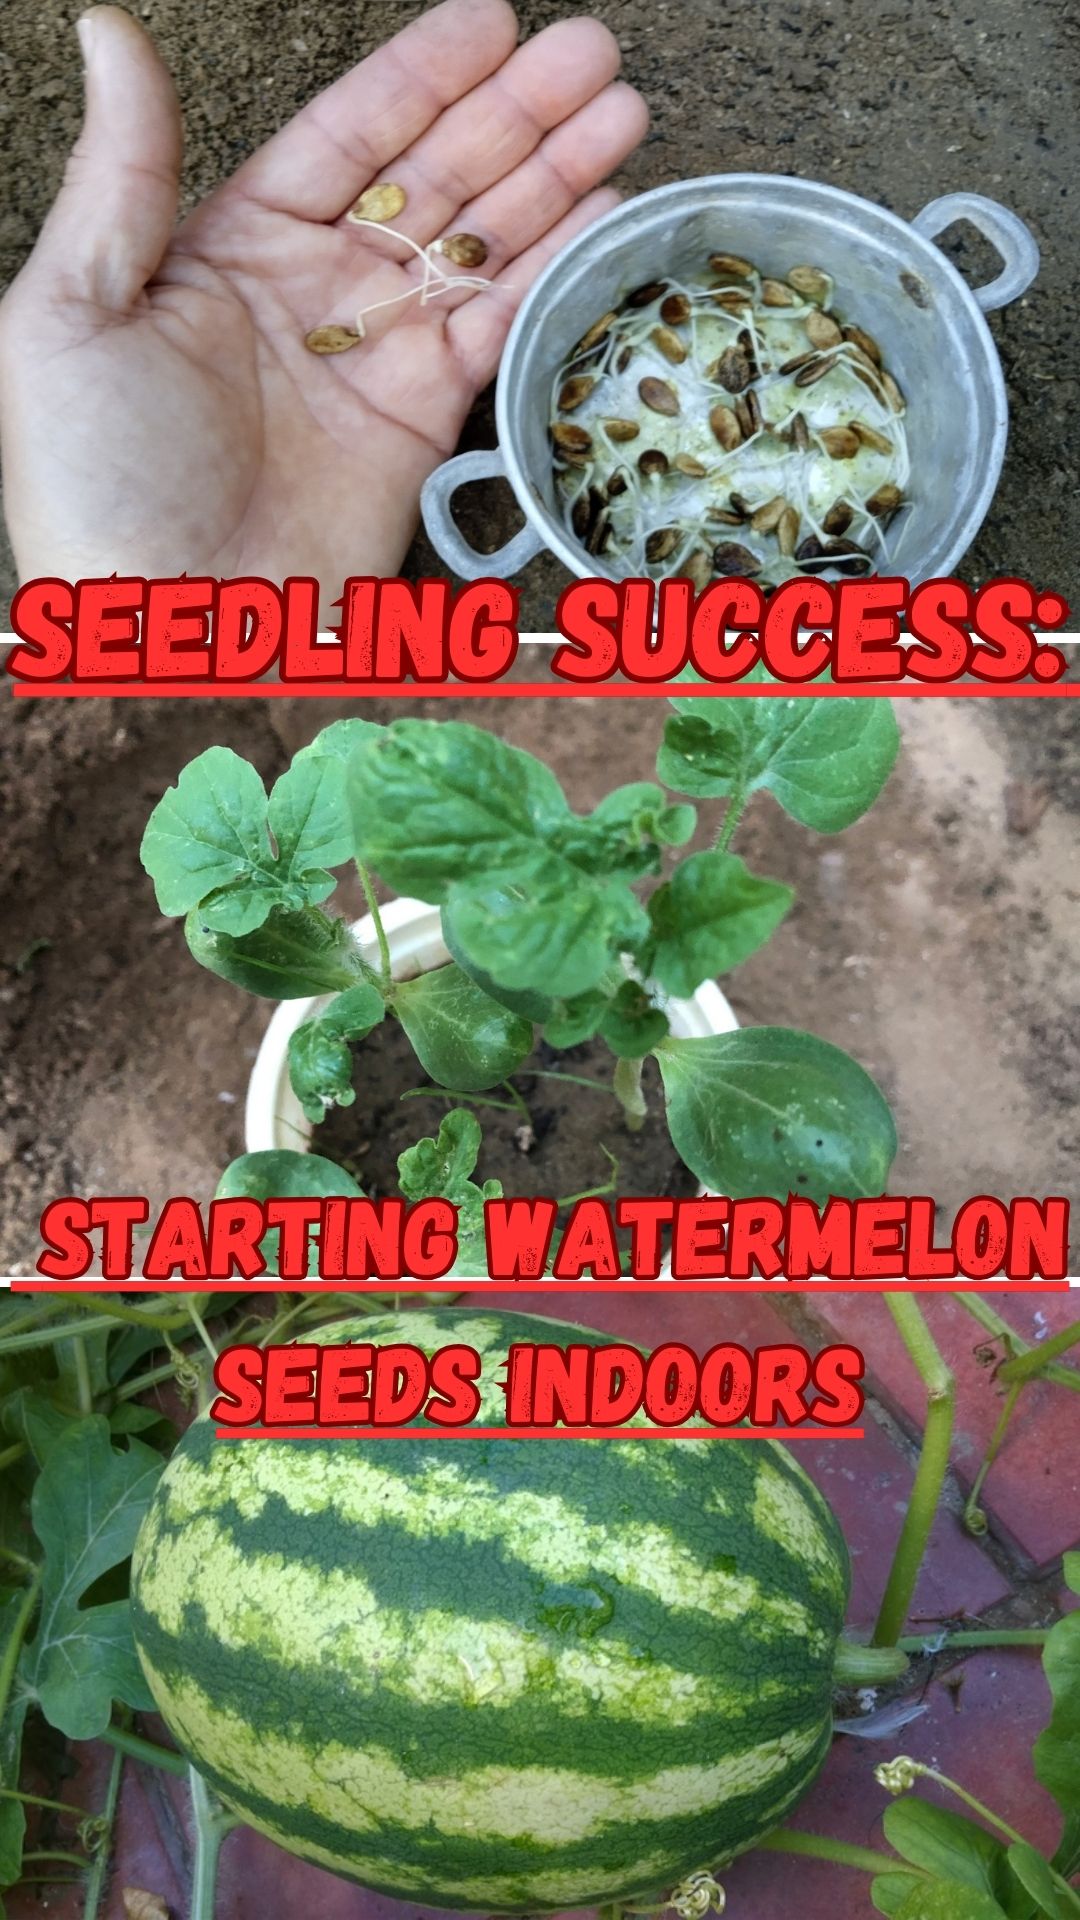 By following this complete guide, you'll be equipped with the knowledge and skills to successfully start watermelon seeds indoors. Embrace the joy of gardening and savor the fruits of your labor as you watch your watermelon seedlings grow and flourish, eventually producing delicious melons in your own garden.